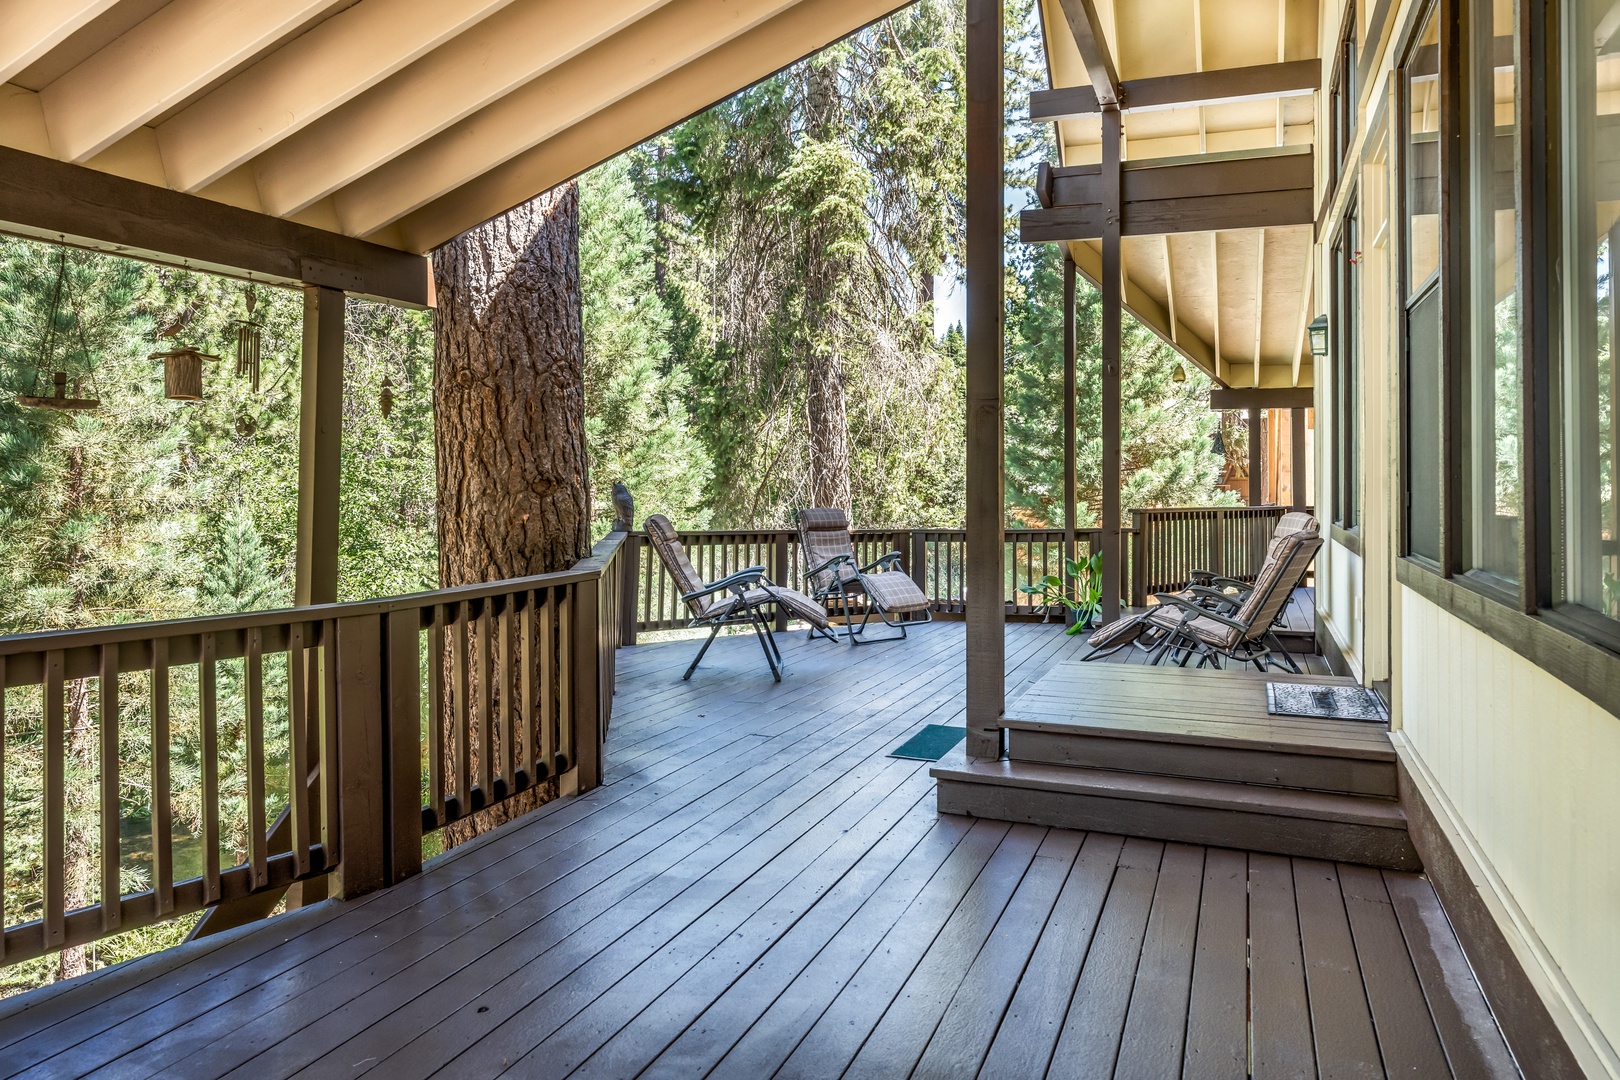 Enjoy relaxing in the tree tops on the fabulous back porch and deck!